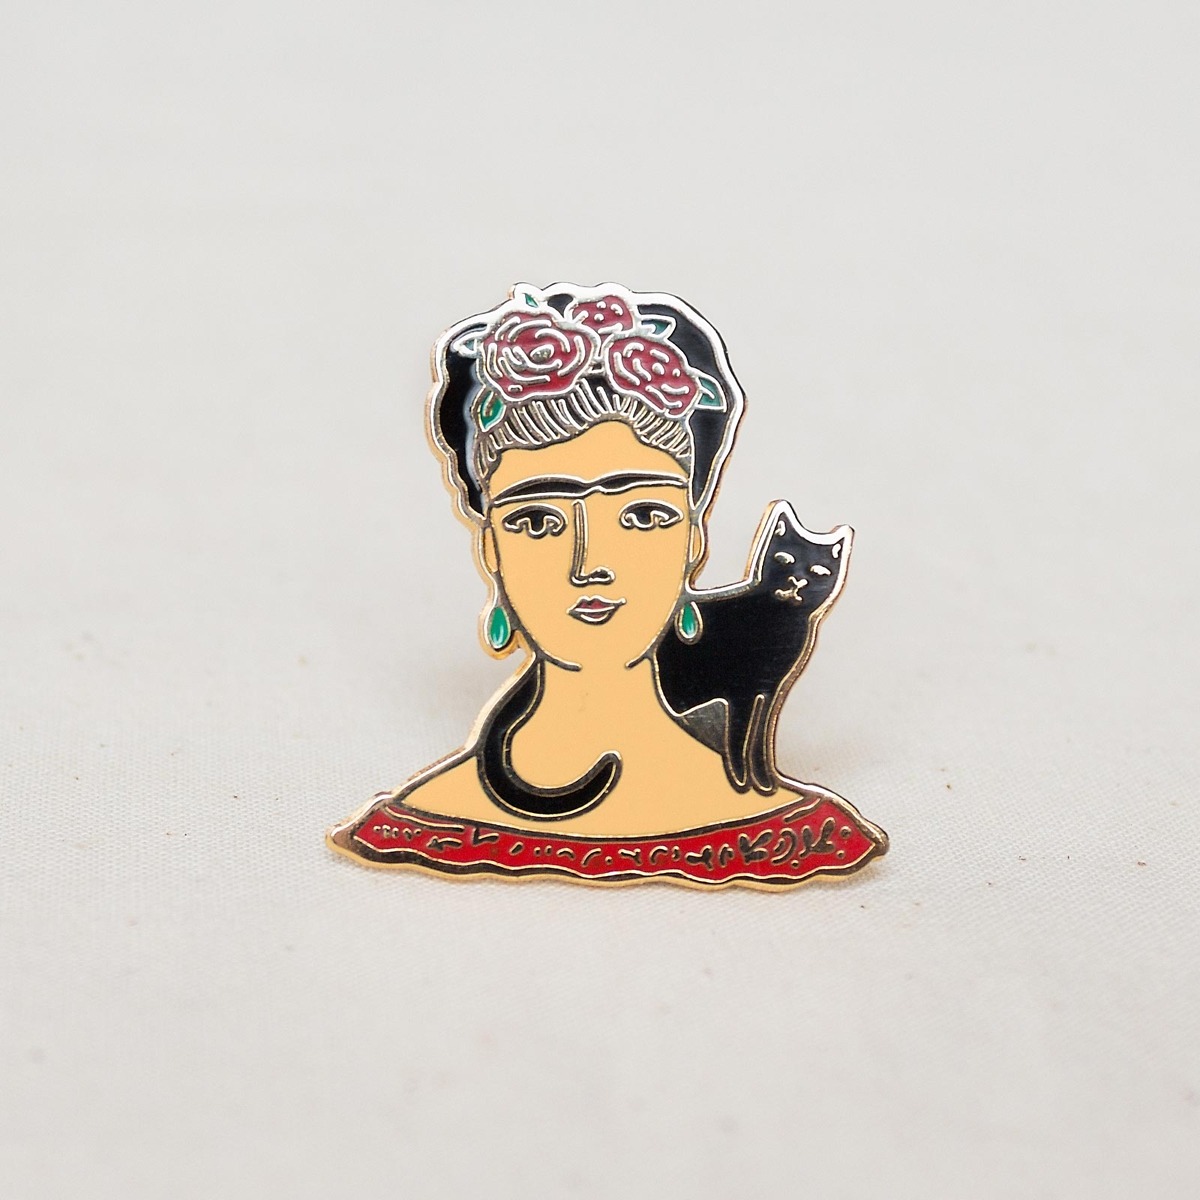 7x Frida Kahlo Soft Enamel Pin Set Lapel Pins Brooches Badges Buttons Gift Girls